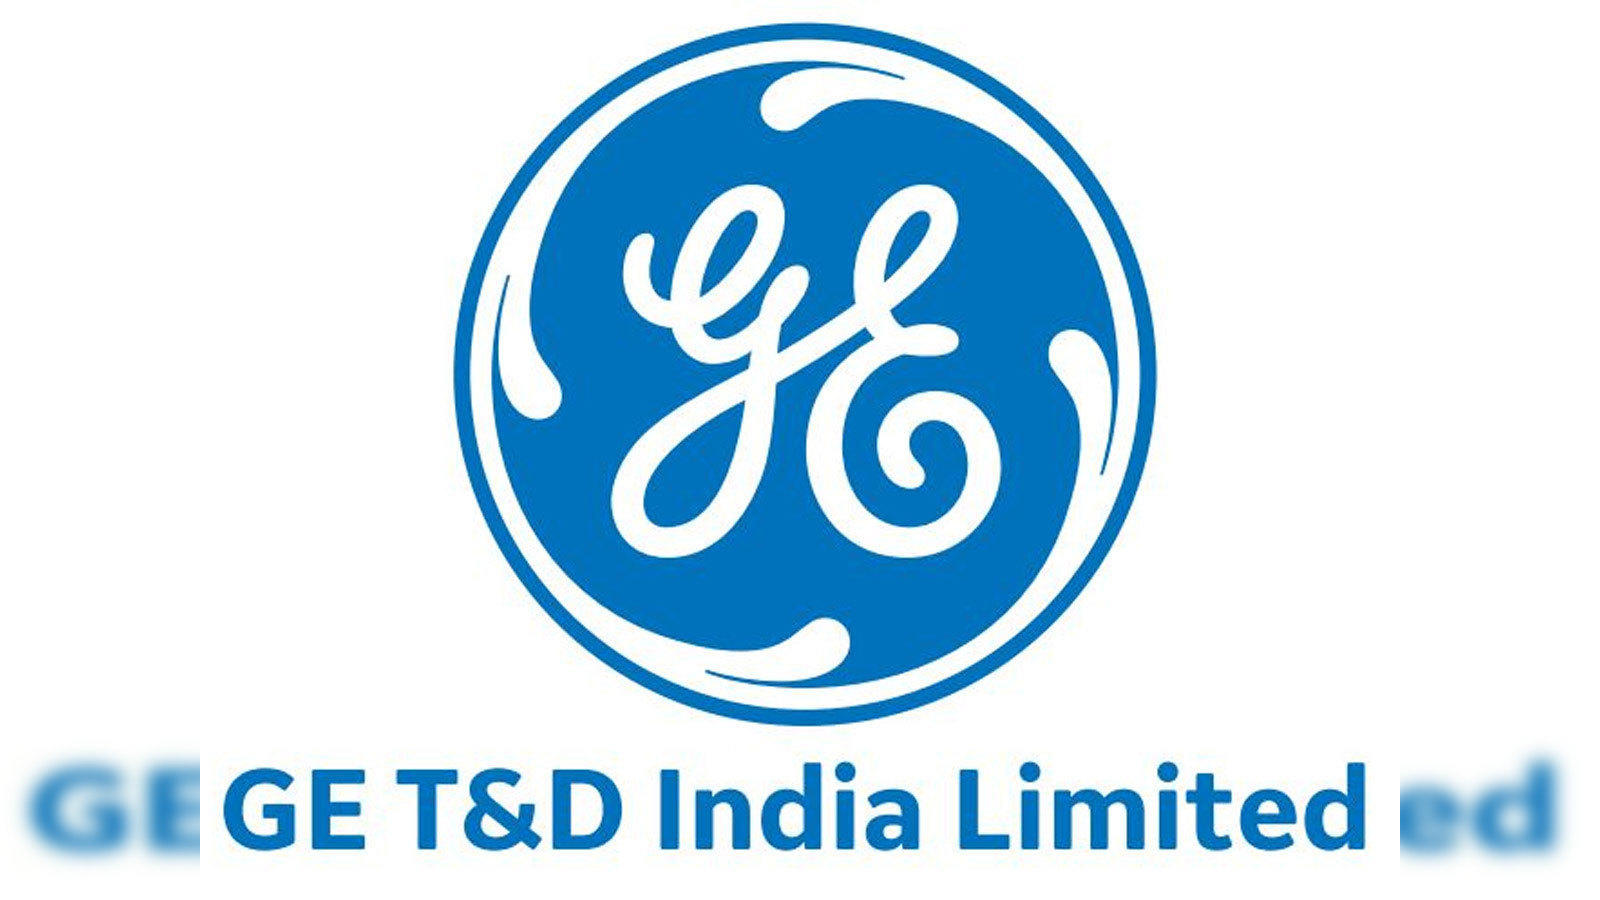 GE T&D resumes operations at Tamil Nadu units - The Economic Times